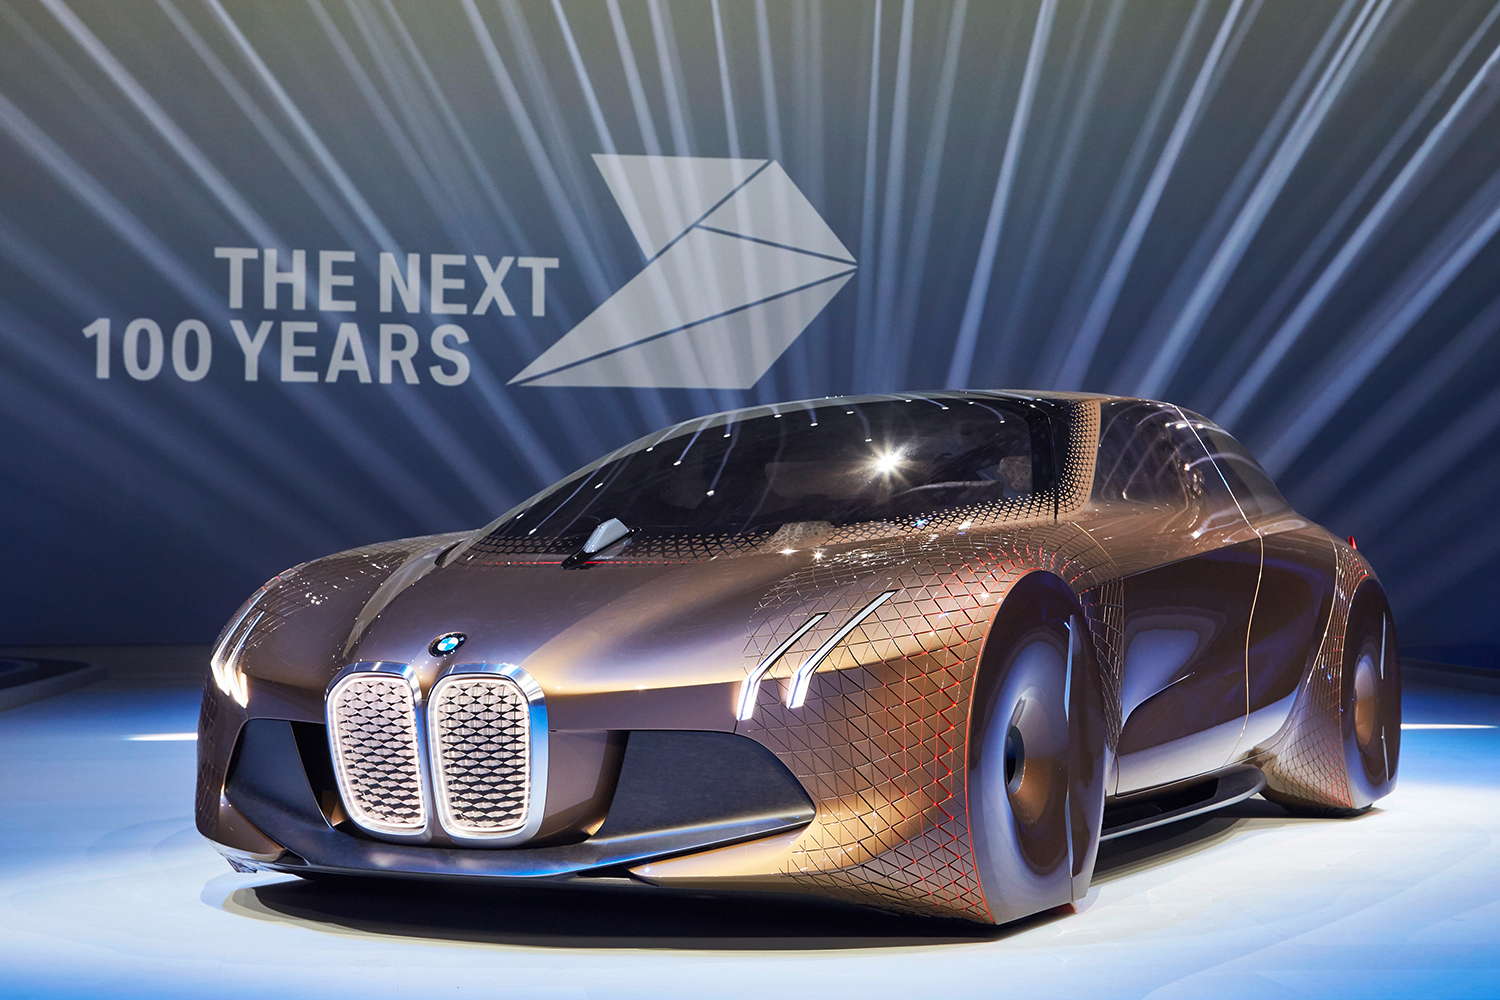 bmw vision next 100 news specs pics performance years 2116 concept 5